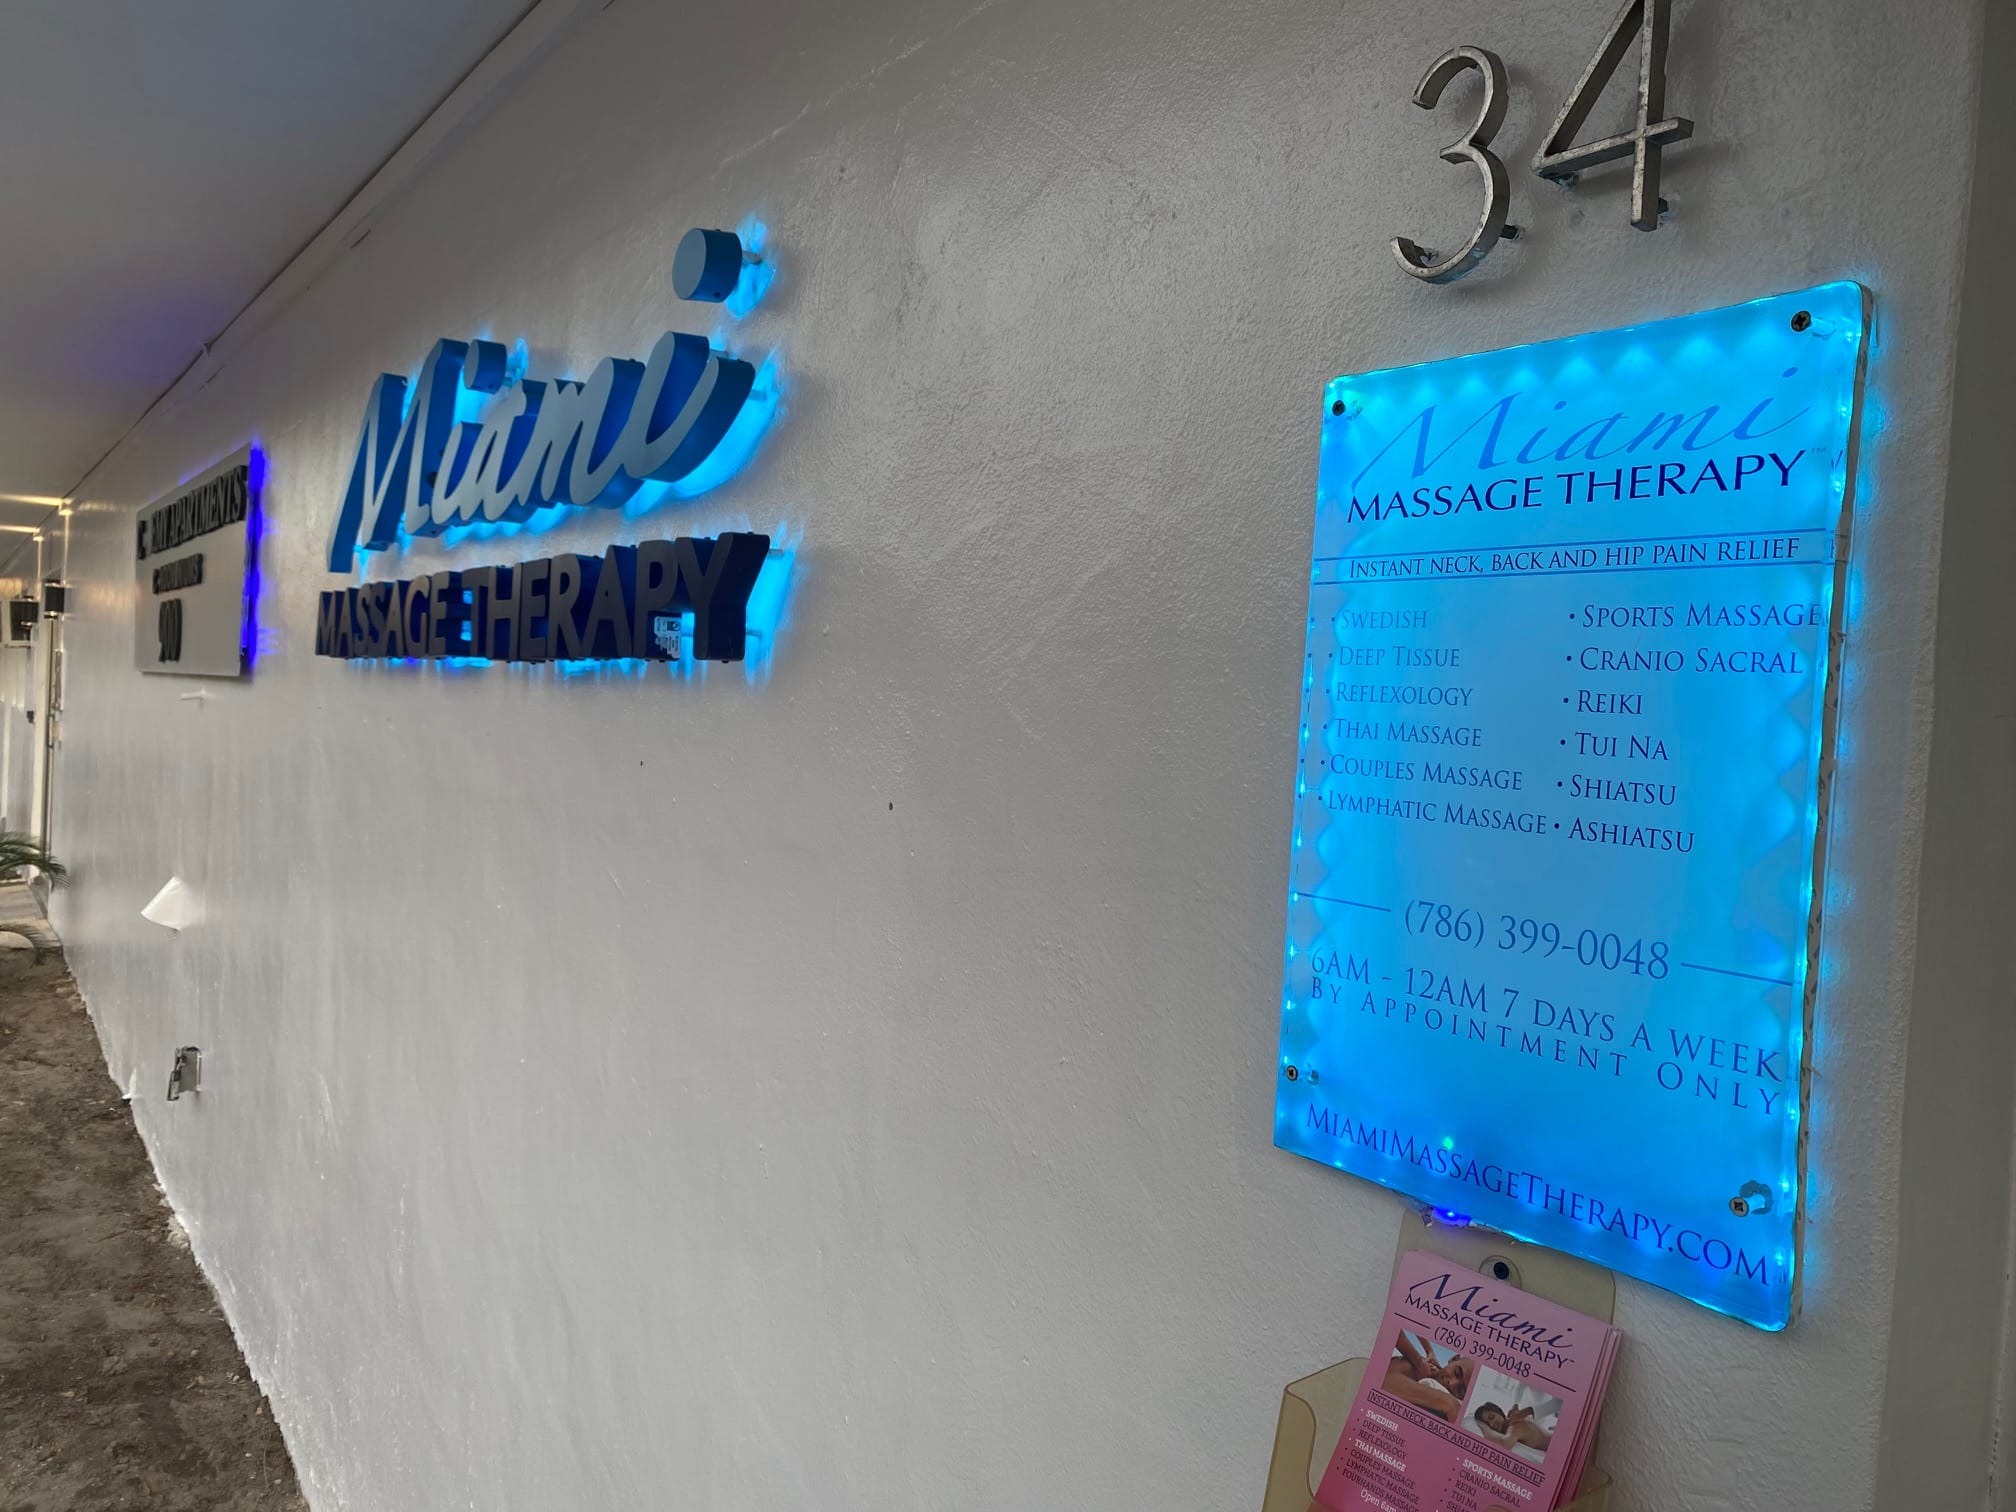 A white wall with a Miami Massage Therapy sign contact details and a list of services offered A business card holder is also visible The address number 34 is displayed above the signs